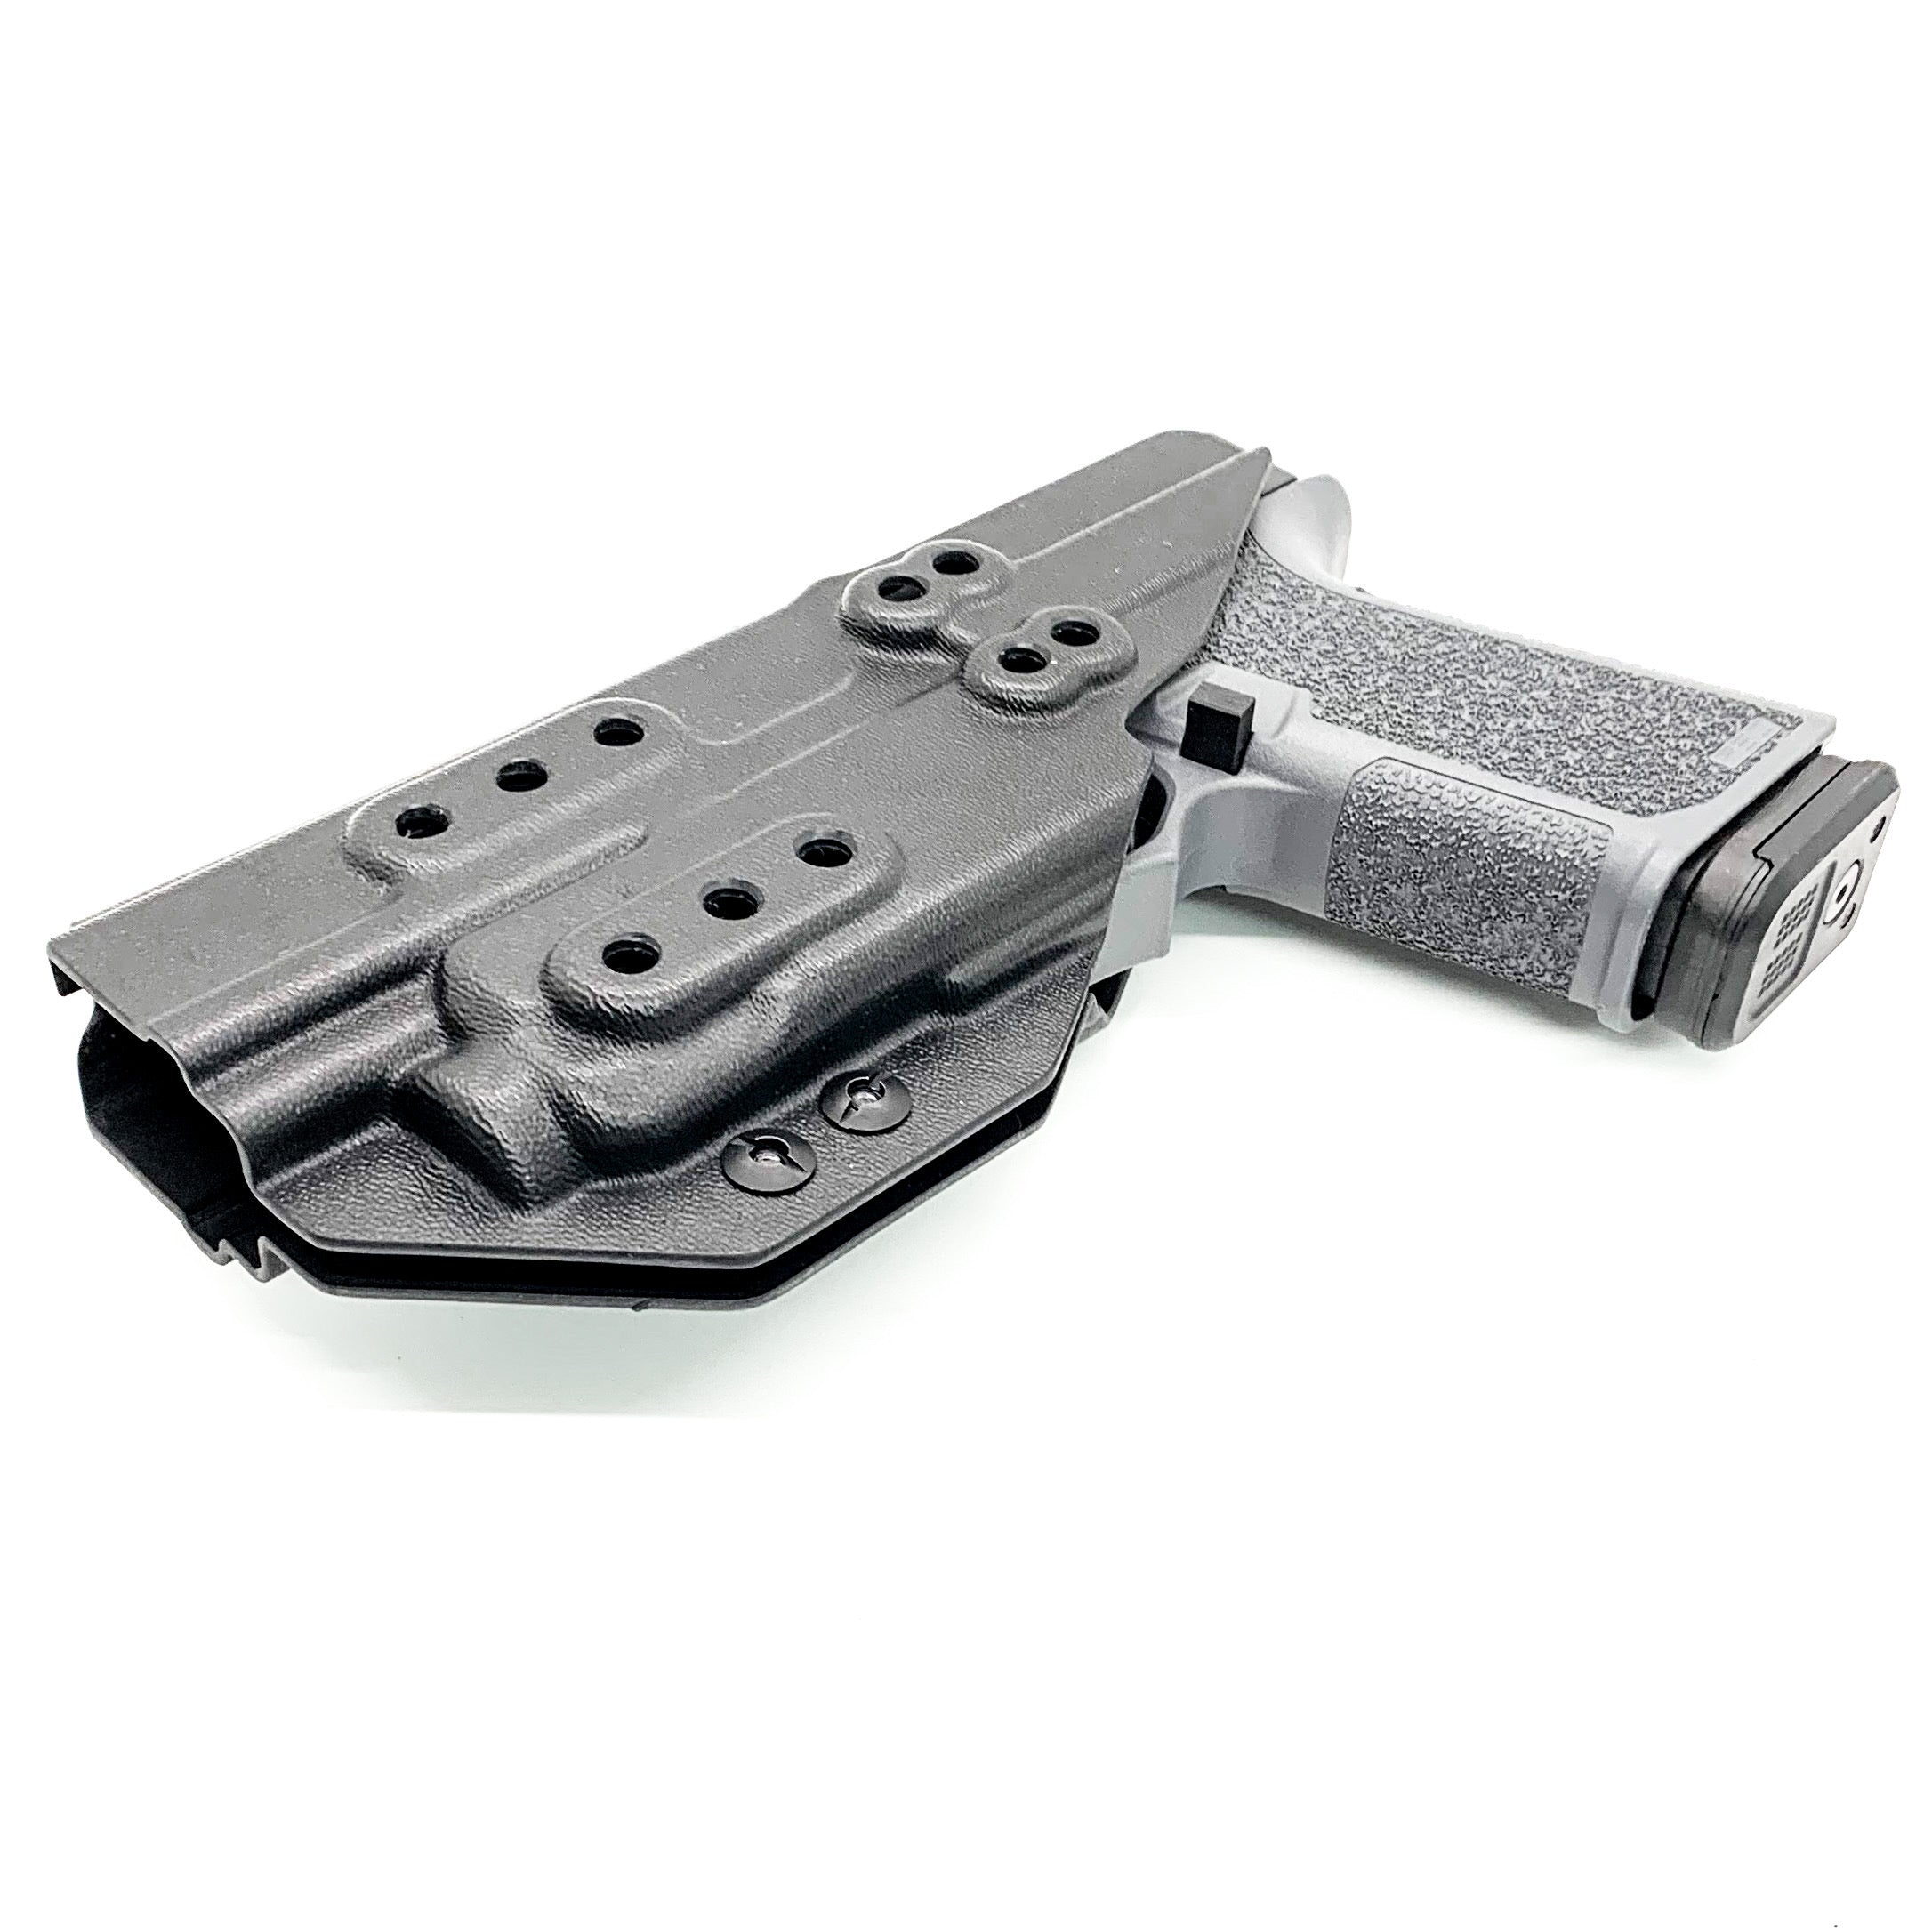 Inside waistband holster designed to fit the Polymer80 PF940 and PF940C pistols with Streamlight TLR-7 or TLR-7A Weapon mounted light. Holster will fit compact, standard and long slides. (Glock 19 & 17 slides) Open Muzzle for threaded barrel, full sweat guard, adjustable retention, minimal material, reduced printing 